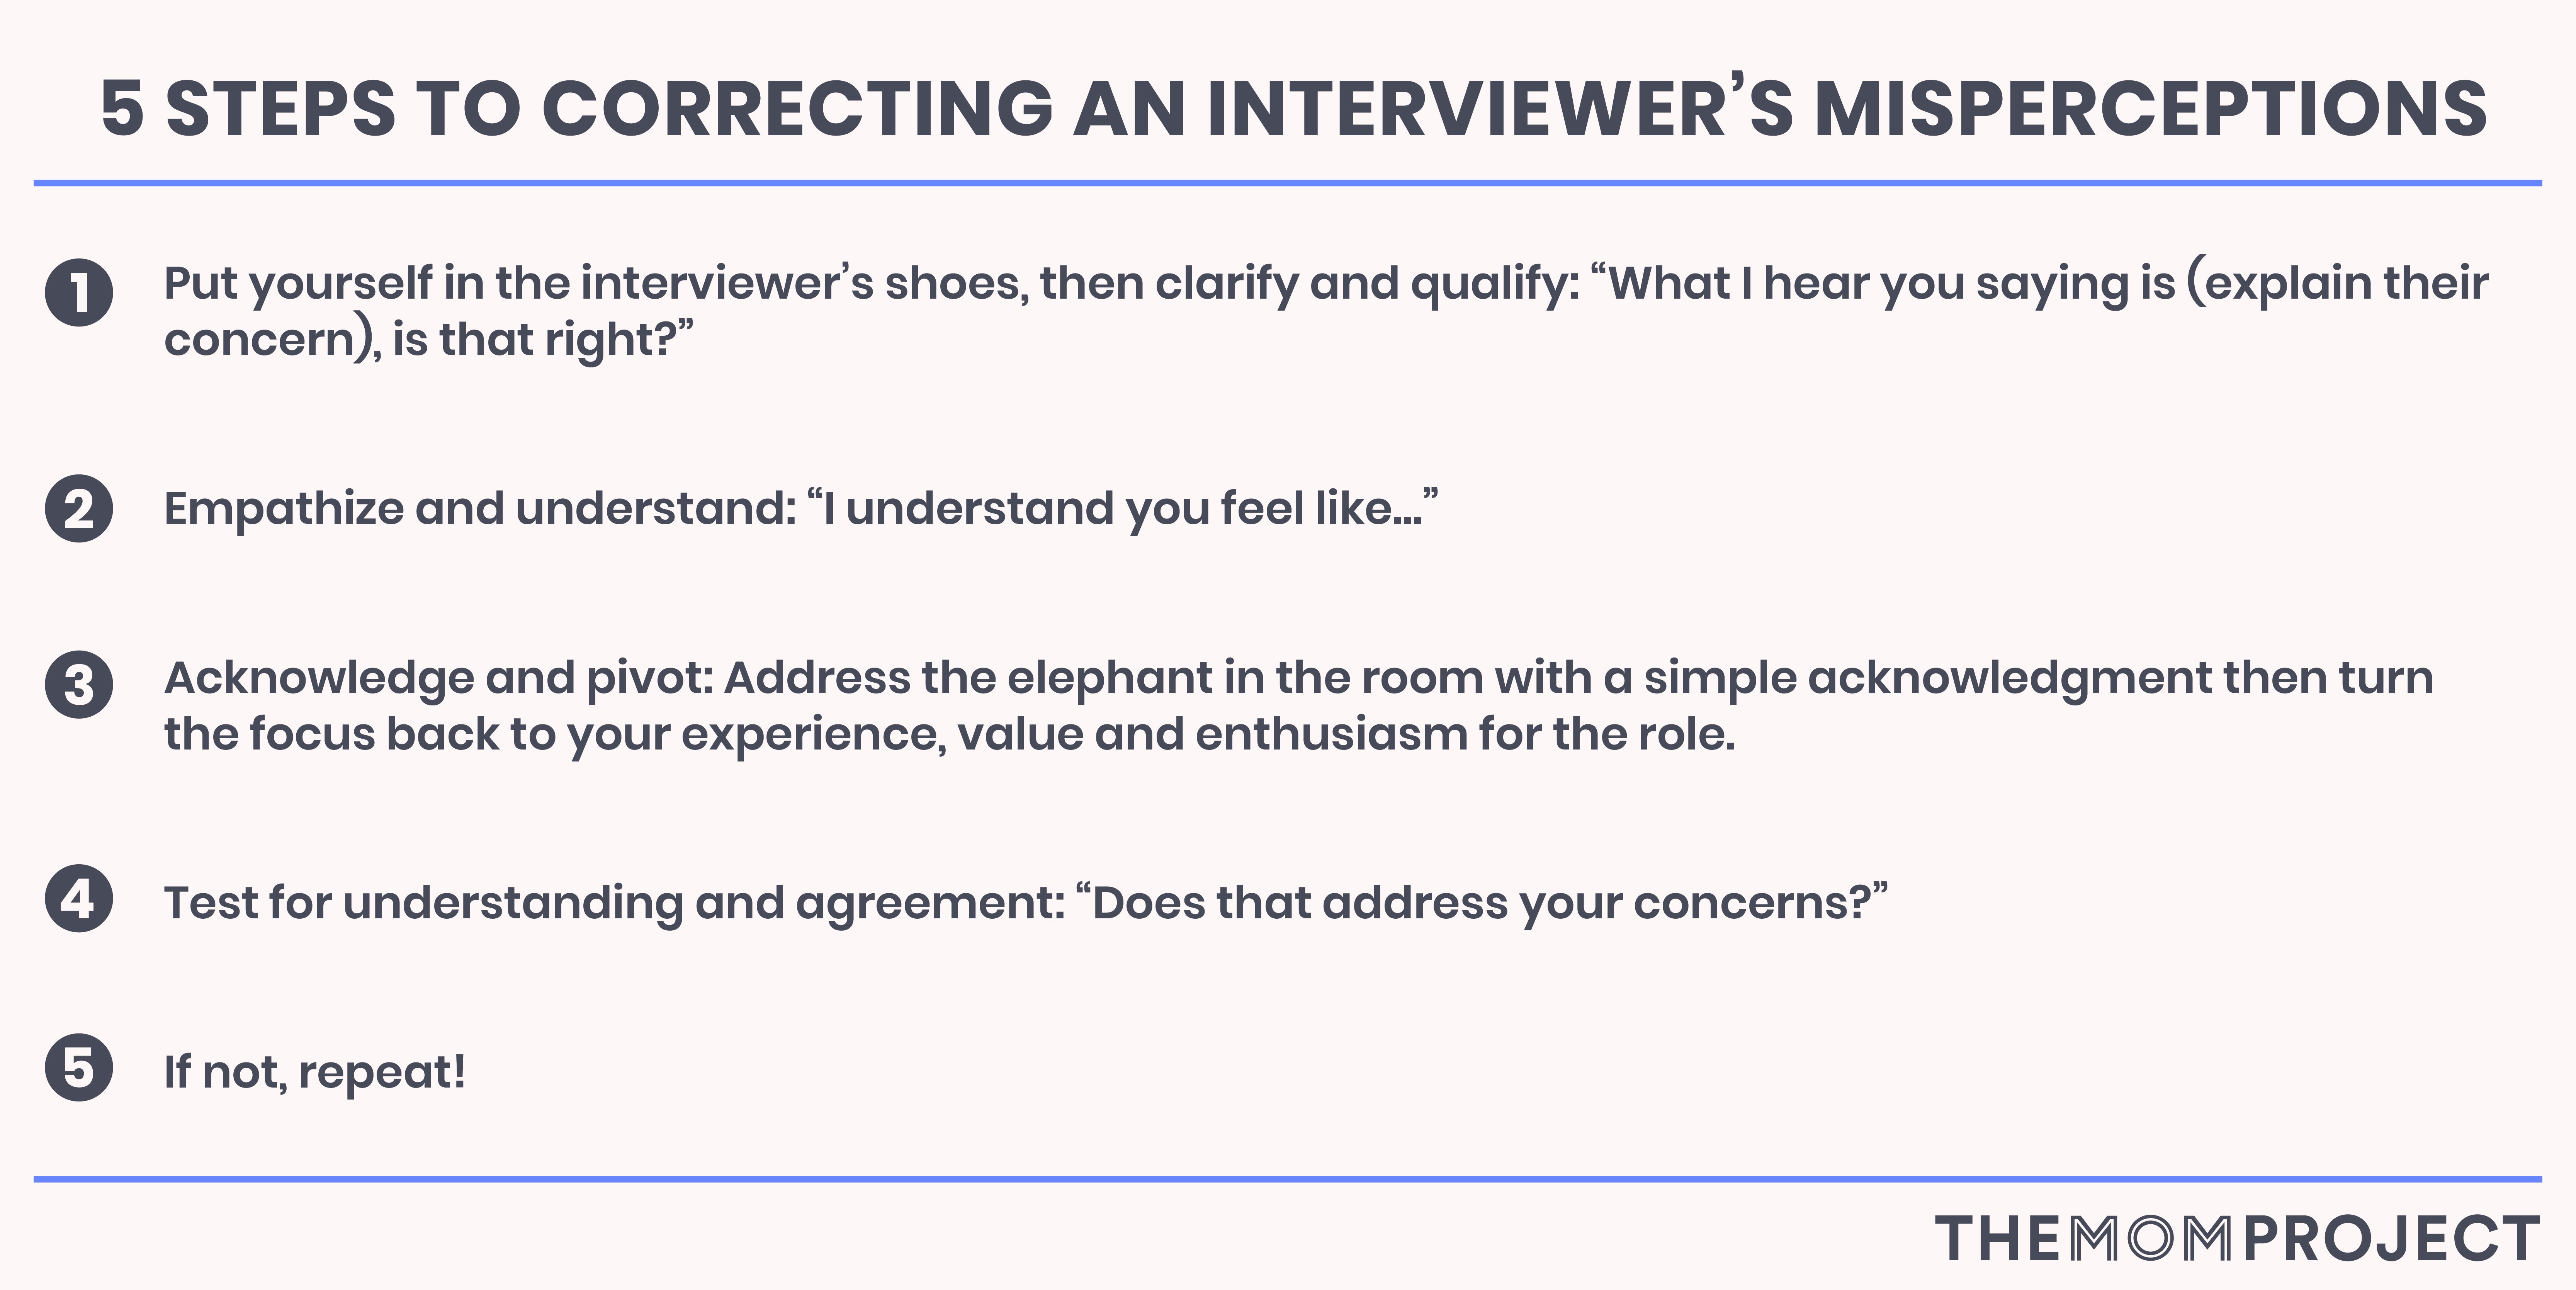 5 Steps to Correcting an Interviewer's Misperceptions